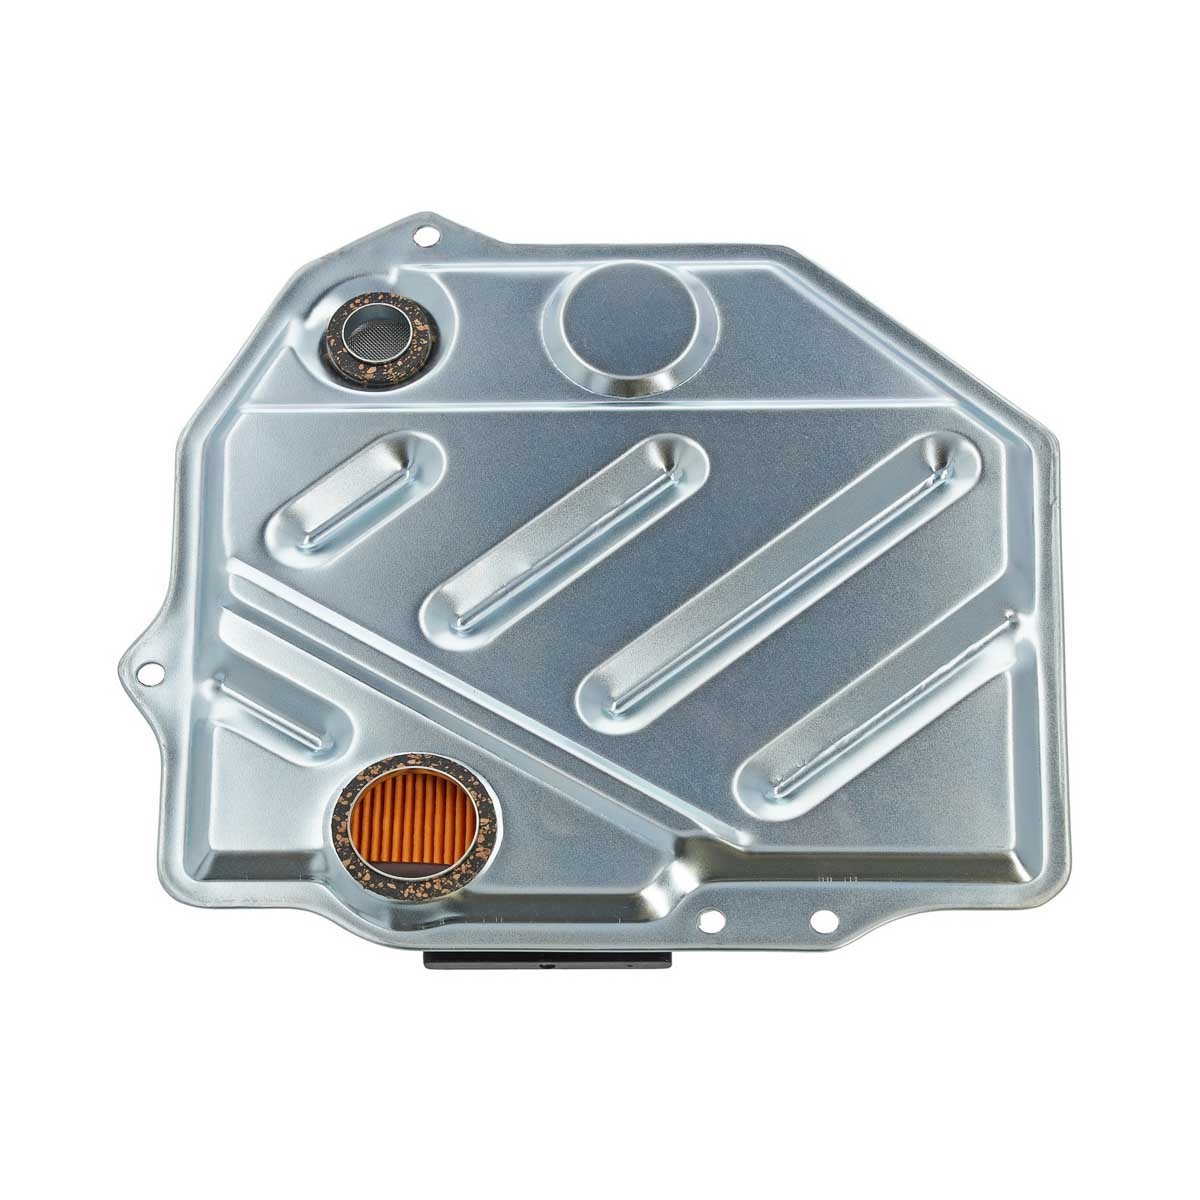 MHF0004 MEYLE without gasket/seal, ORIGINAL Quality Transmission Filter 014 027 2015 buy